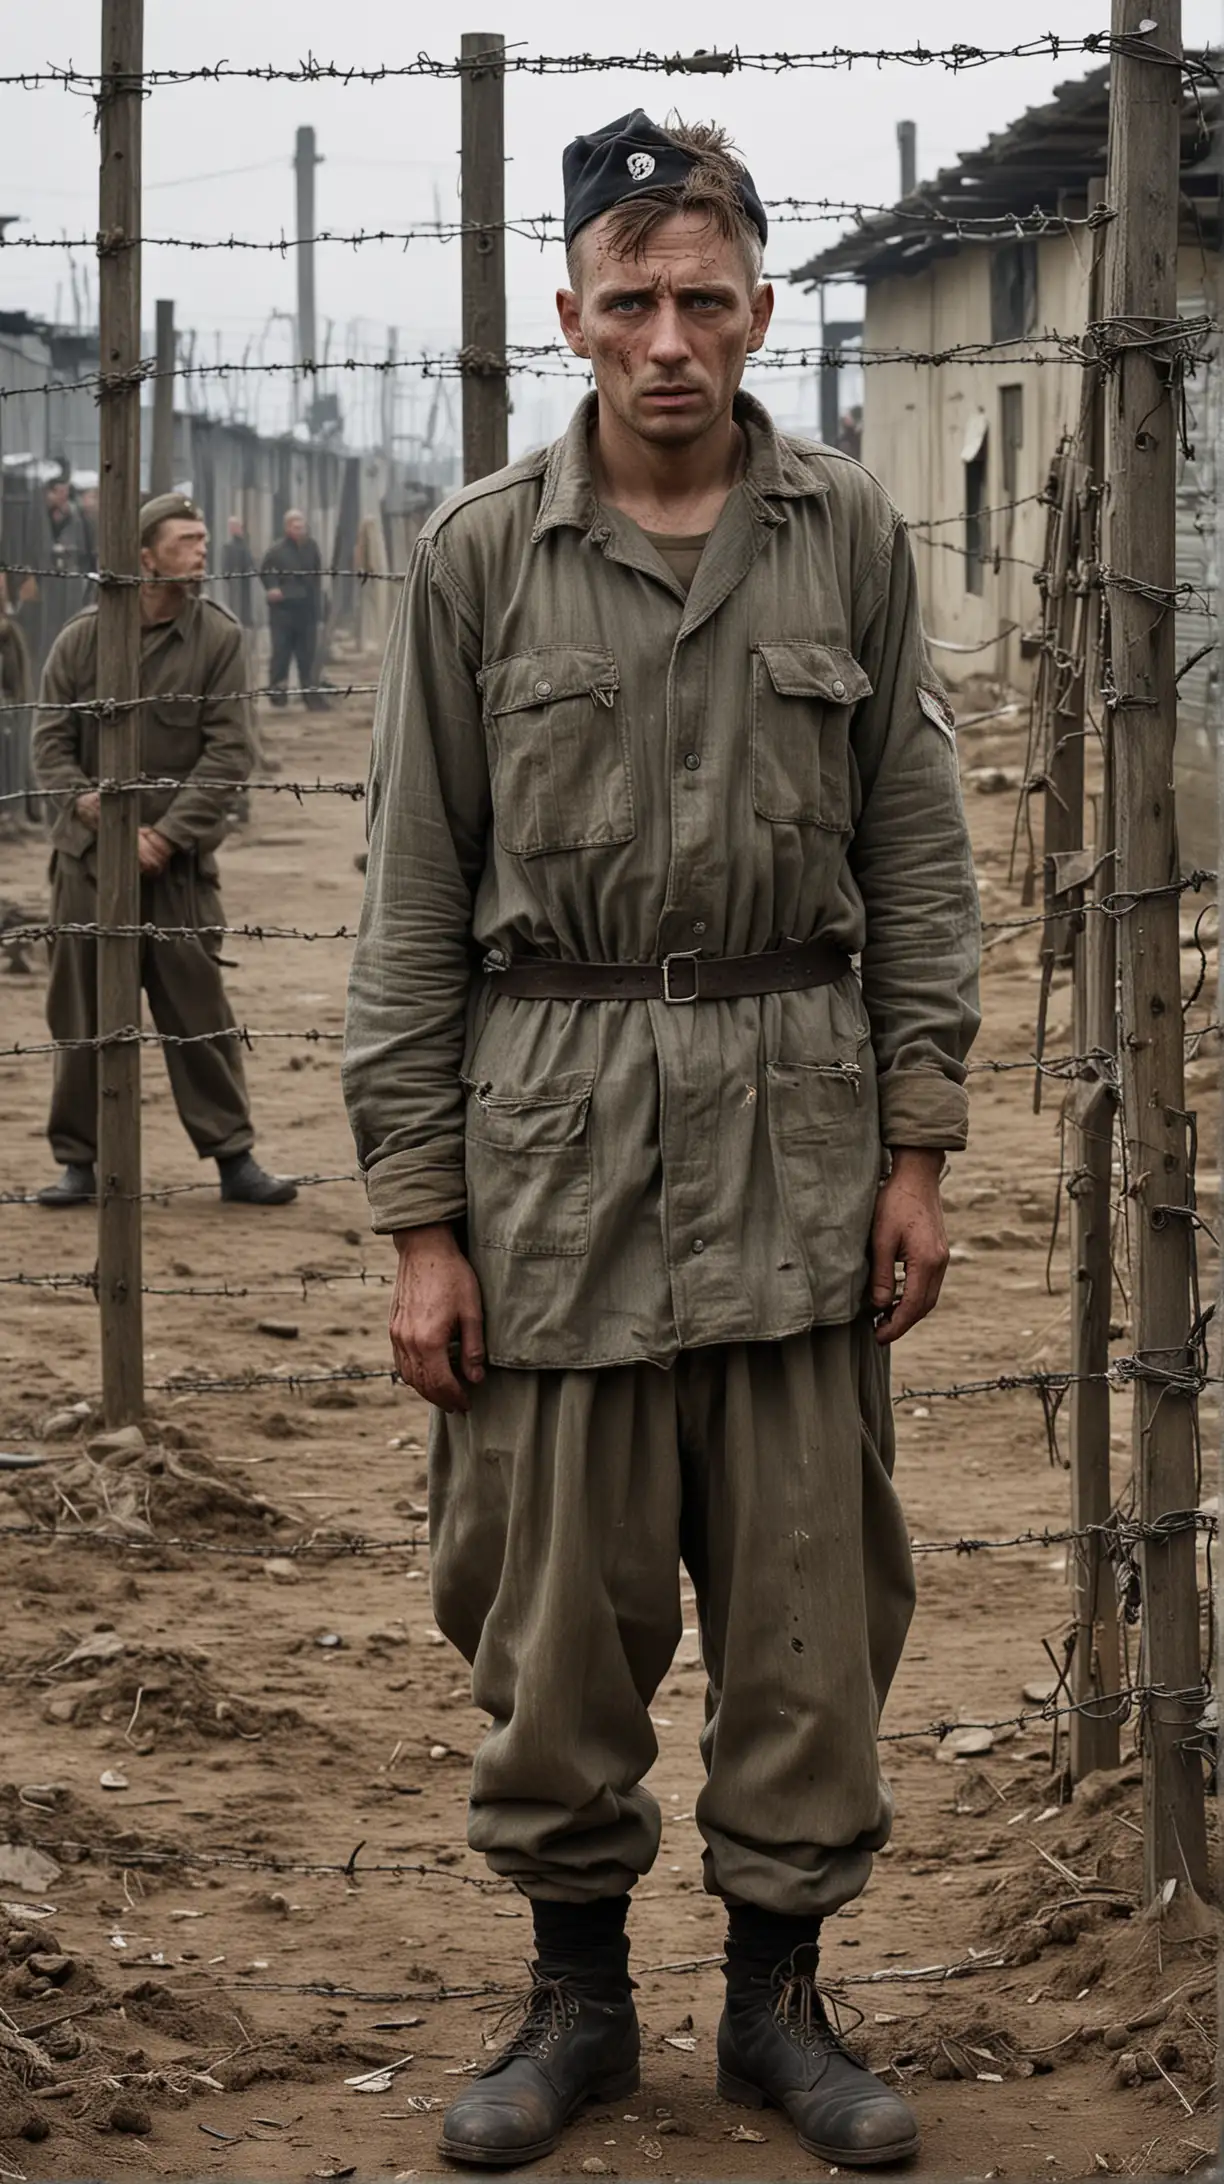 Generate an image of a prisoner in a German camp during World War II. The prisoner should be depicted in a worn and ragged uniform, with a gaunt and weary expression on their face, conveying the hardships and suffering endured in captivity. They could be shown standing or sitting within the confines of the camp, surrounded by barbed wire fences and guard towers, emphasizing their confinement and isolation. The background should evoke the bleakness and desolation of the camp, with perhaps hints of the harsh conditions and overcrowded barracks. The overall mood should convey a sense of despair, resilience, and the indomitable human spirit amidst the horrors of war and captivity.